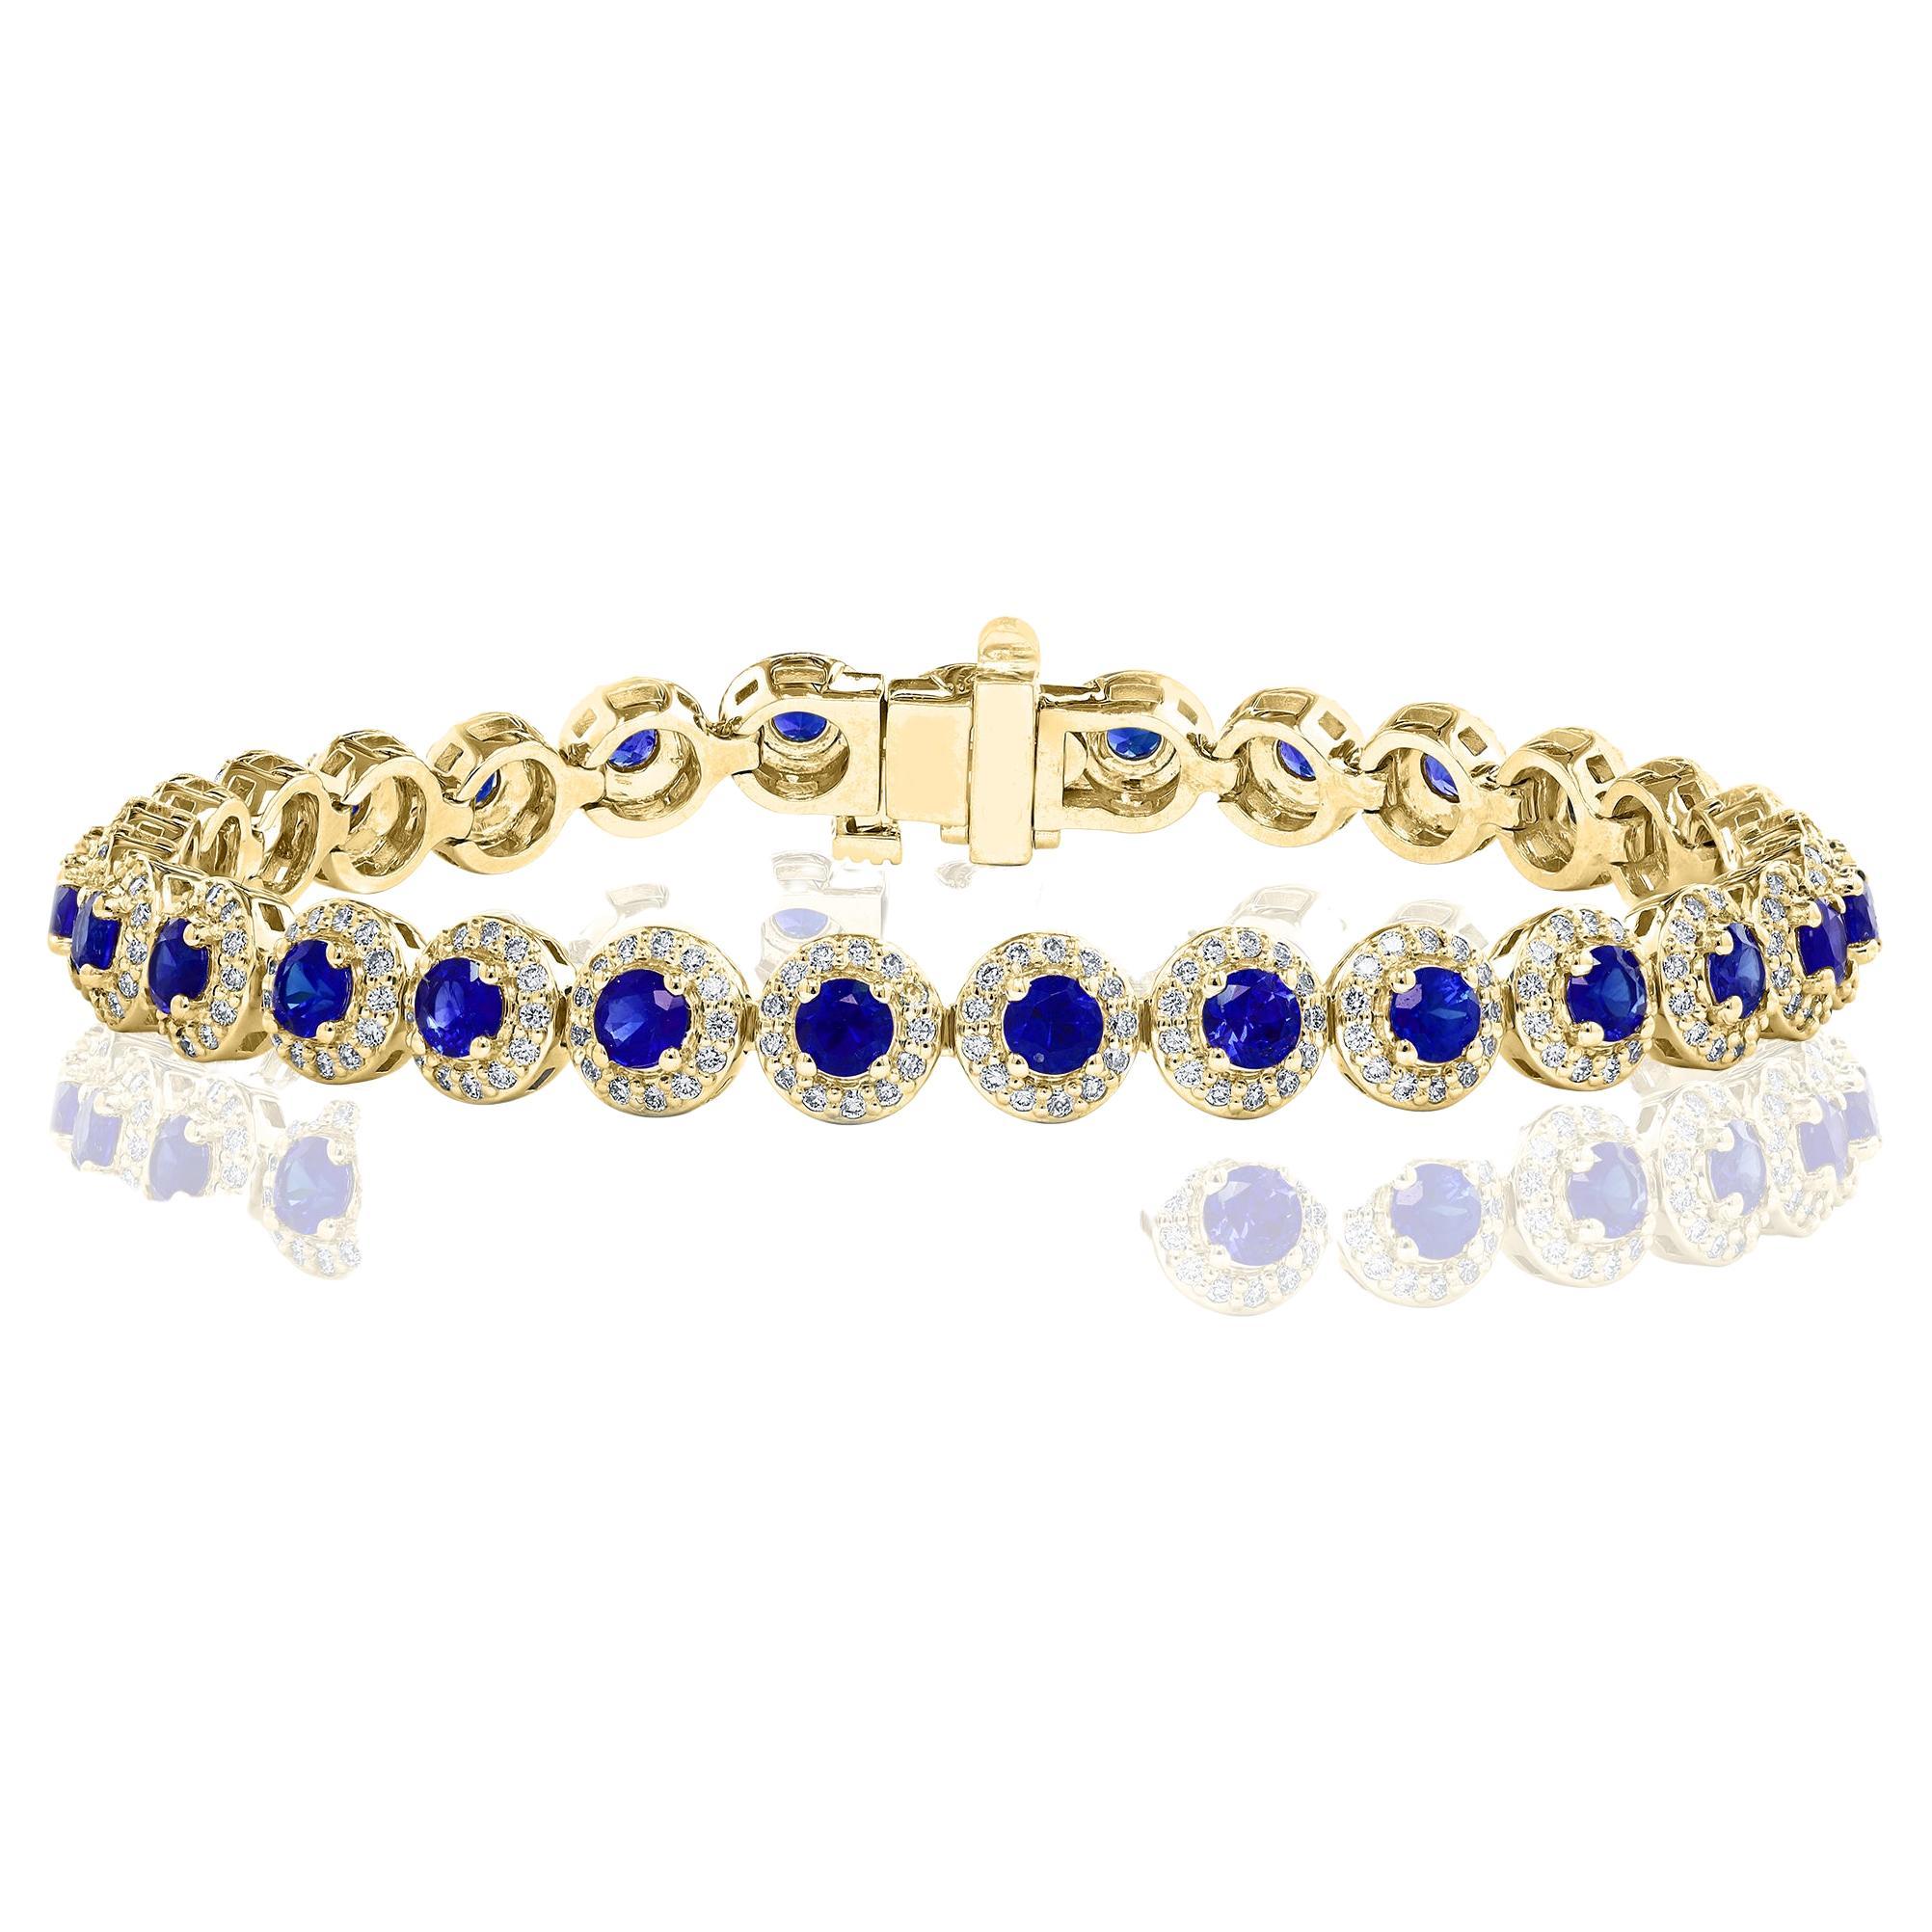 4.67 Carat Round Cut Sapphire and Diamond Tennis Bracelet in 14K Yellow Gold For Sale